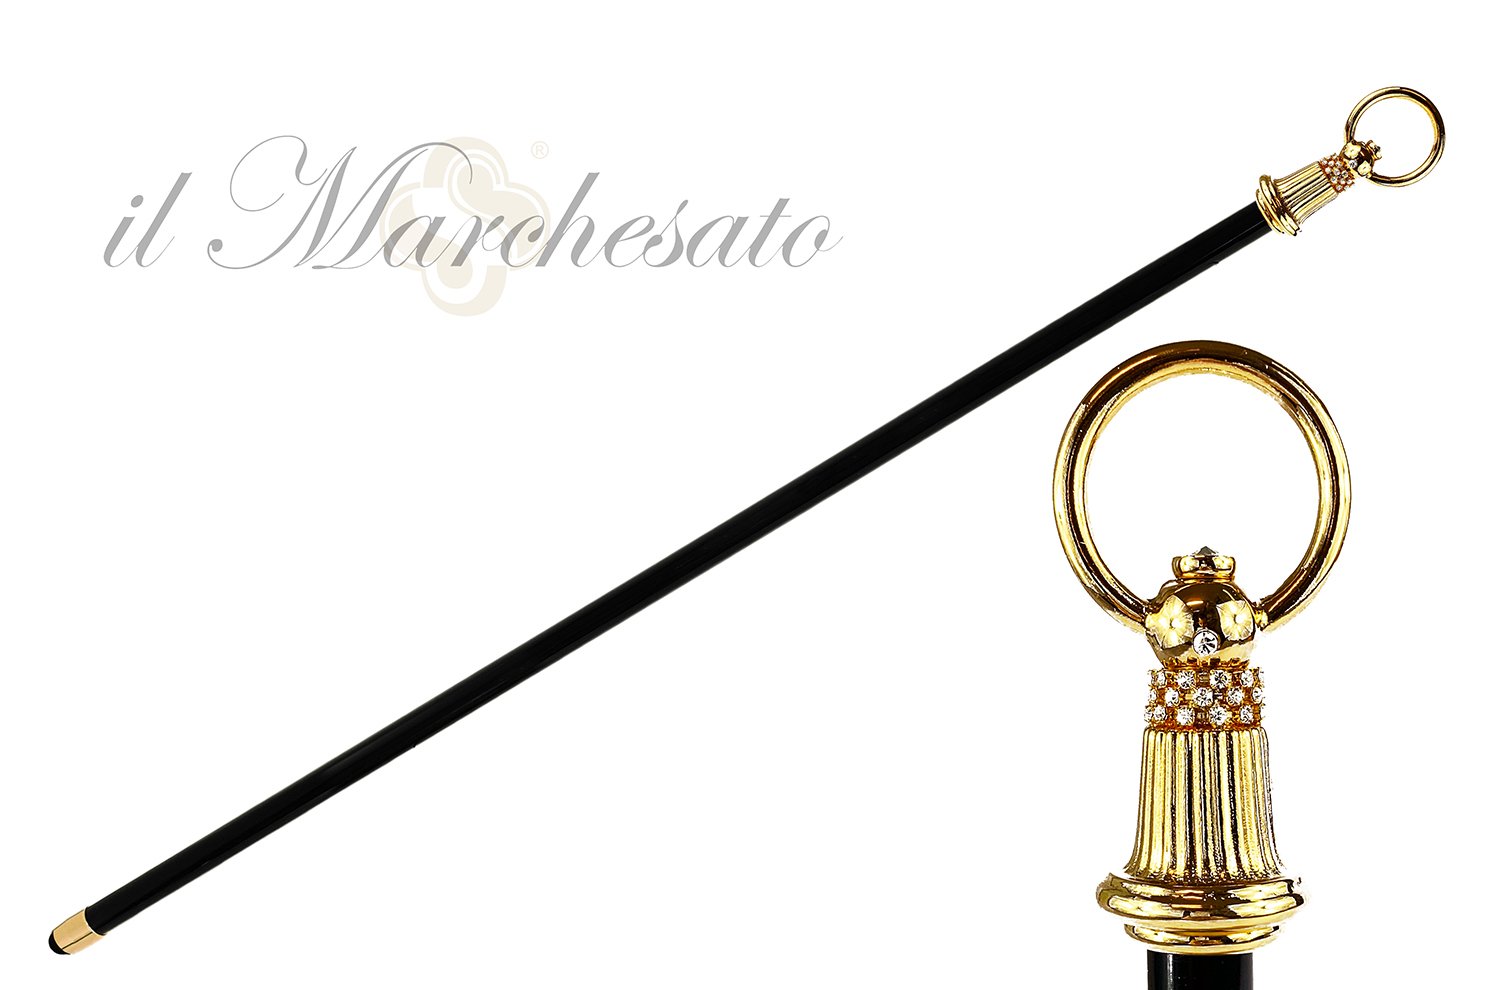 Luxury walking stick with bell handle - IL MARCHESATO LUXURY UMBRELLAS, CANES AND SHOEHORNS